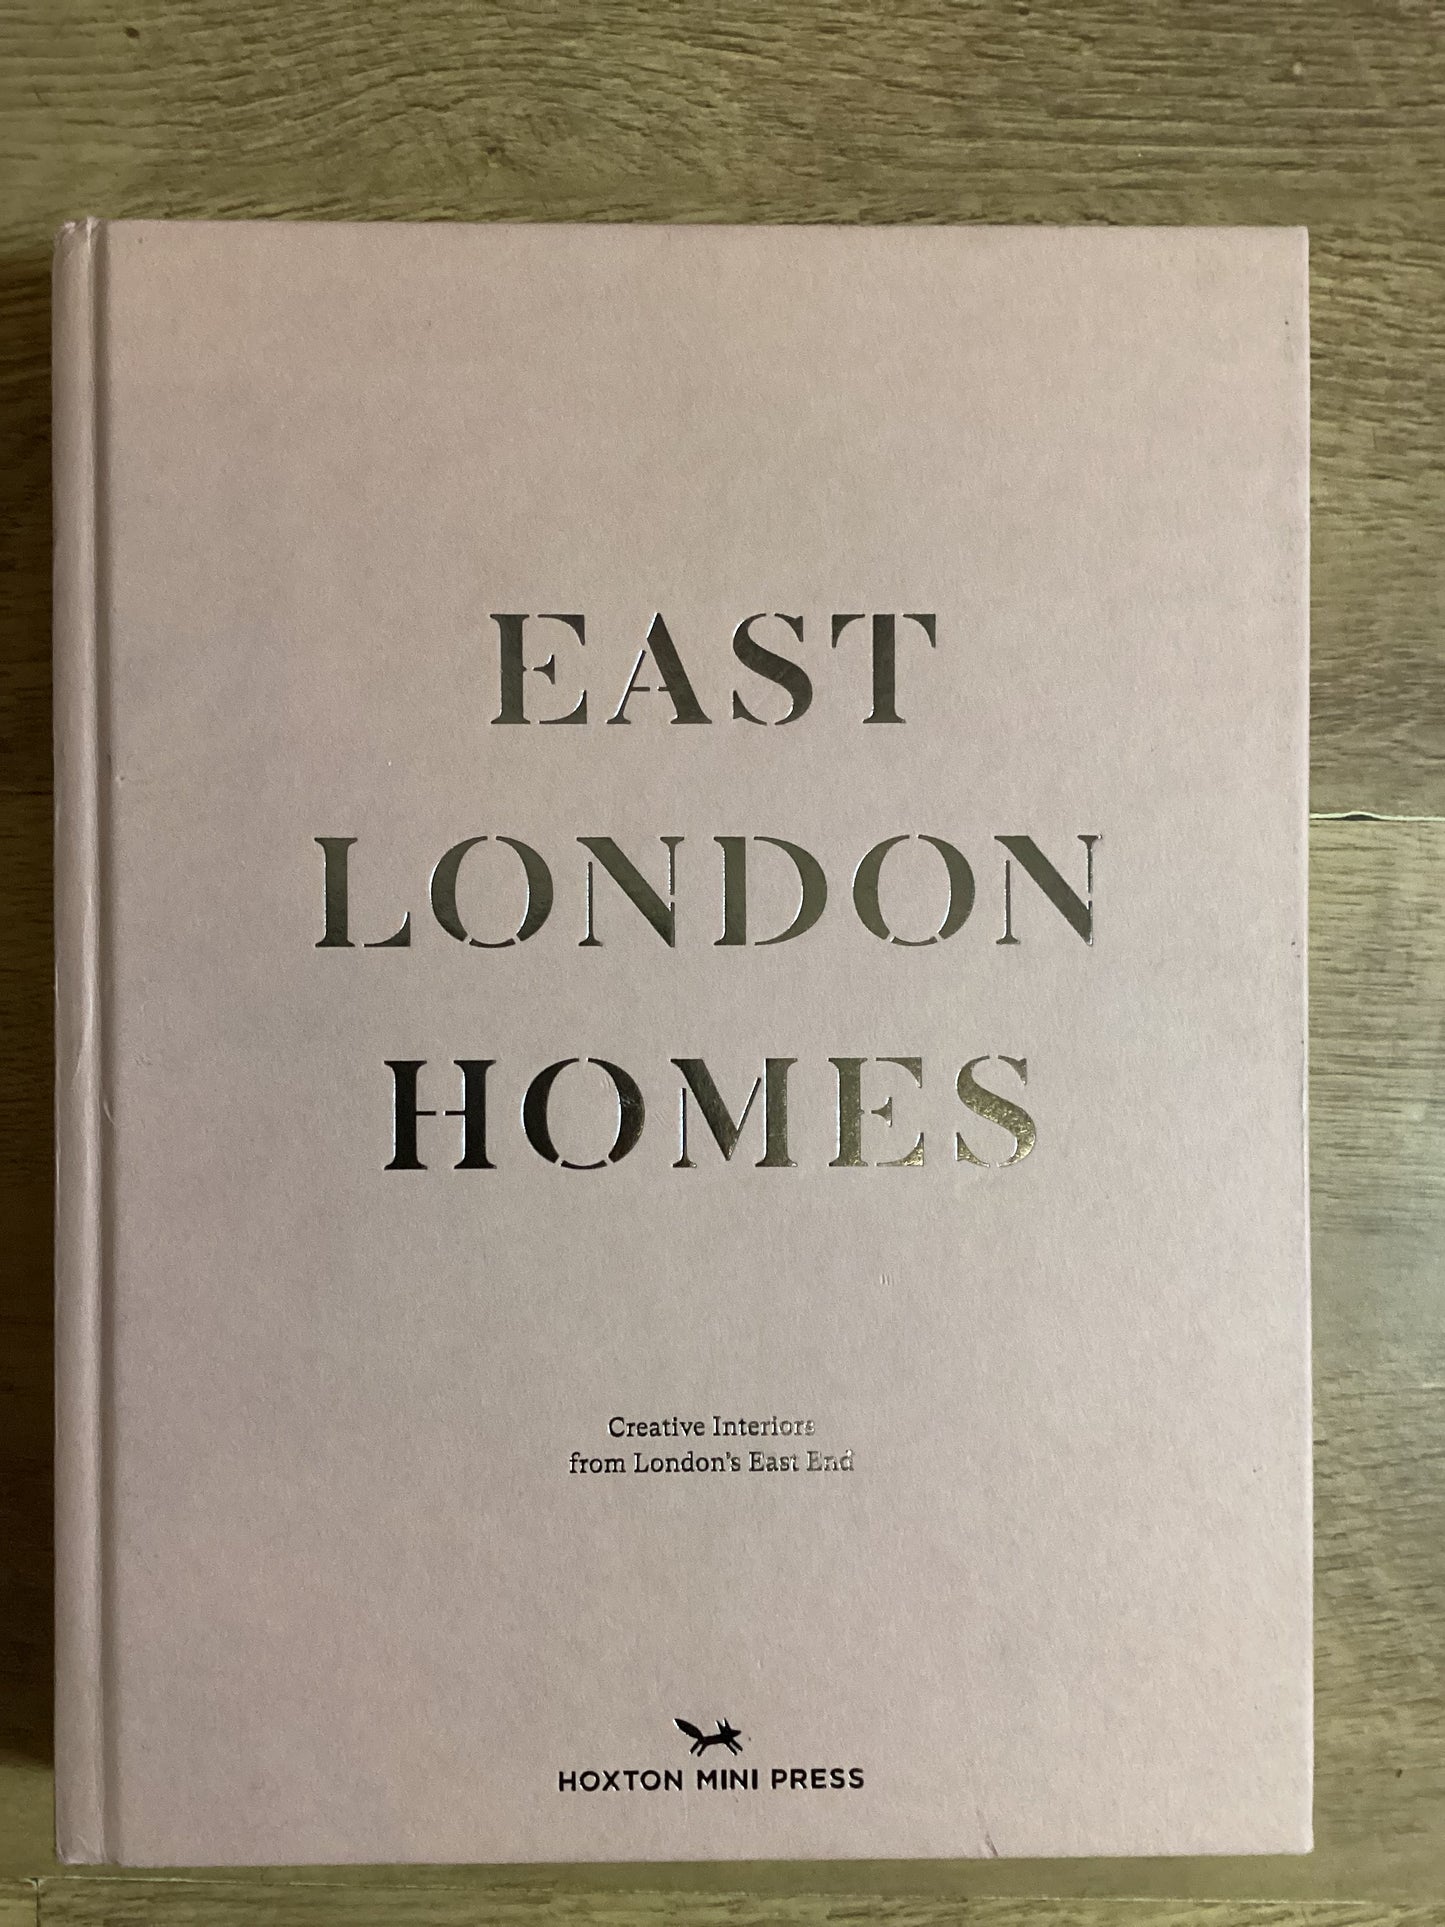 East London Homes - Creative Interiors from London's East End - Sarah Bagner and John Aaron Green